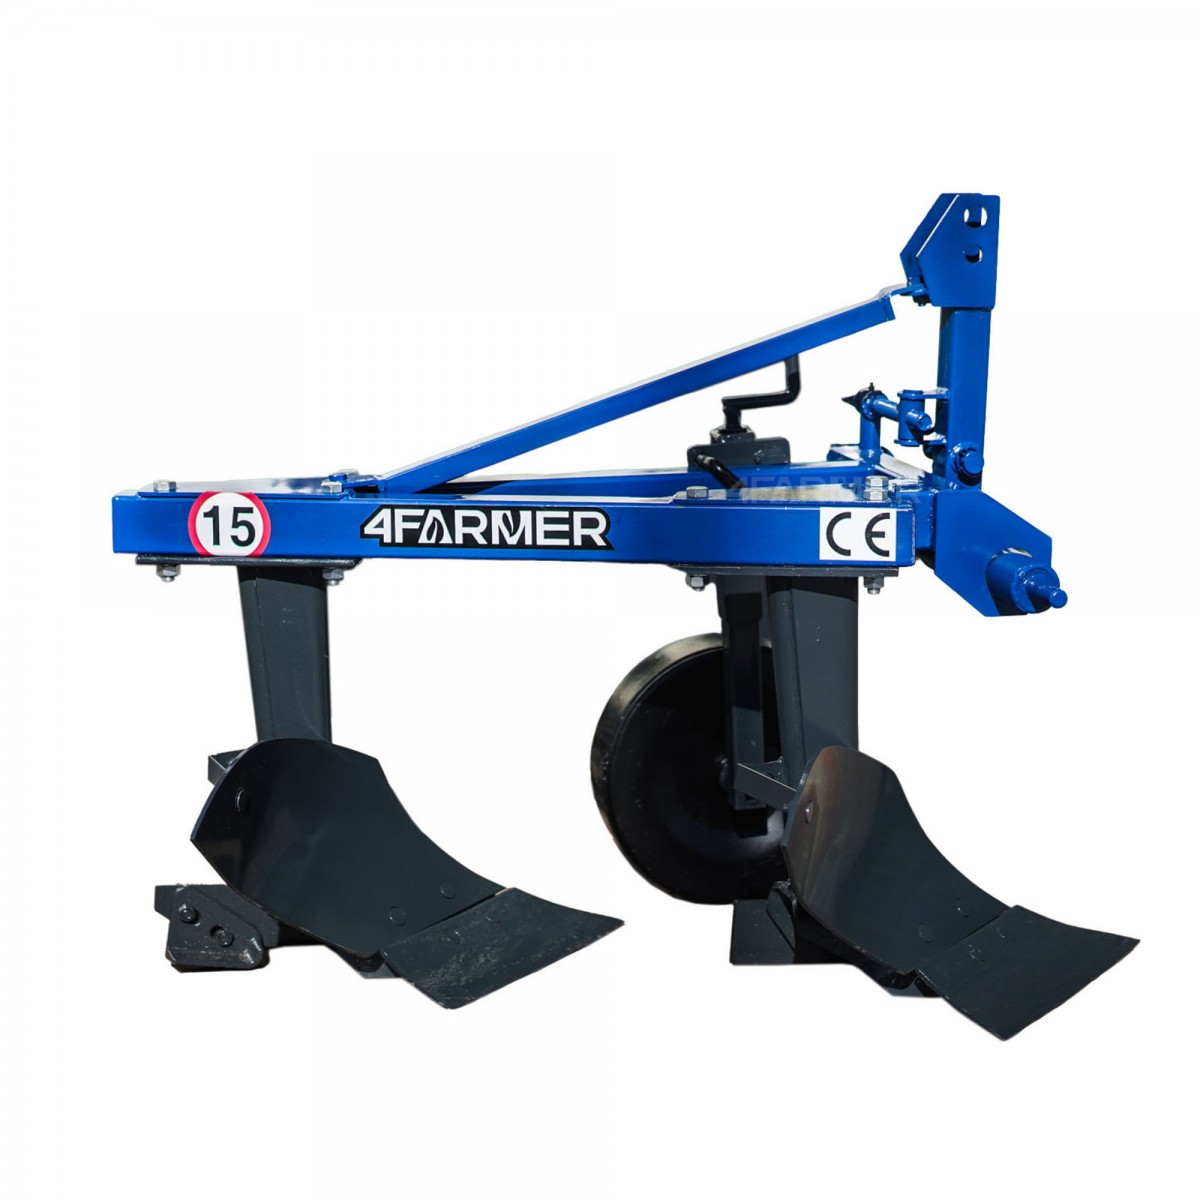 Double furrow plow with support wheel 4FARMER